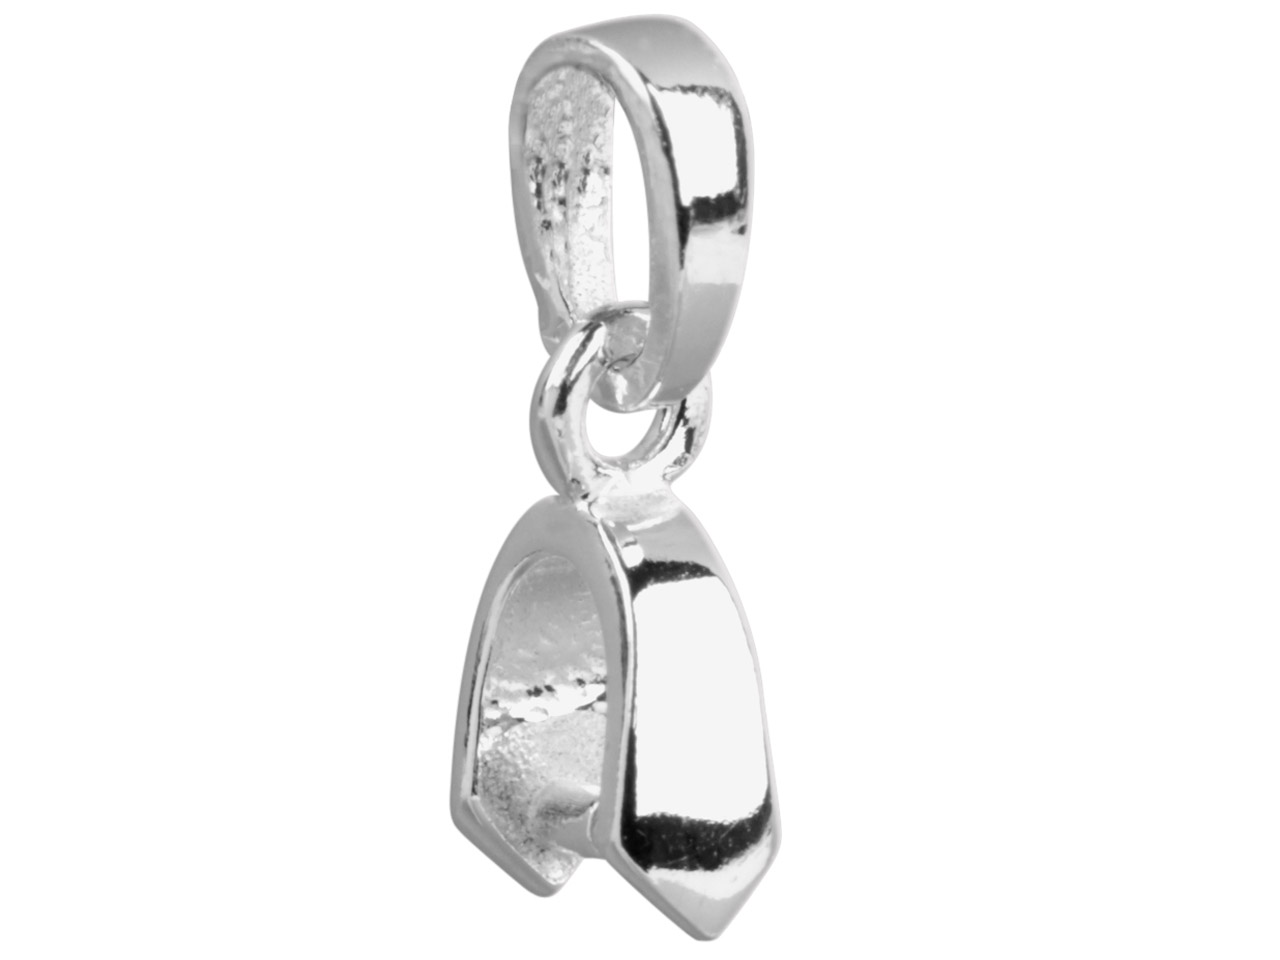 Sterling Silver Pinch Bail, Pinch Attachment With Bail Questions & Answers